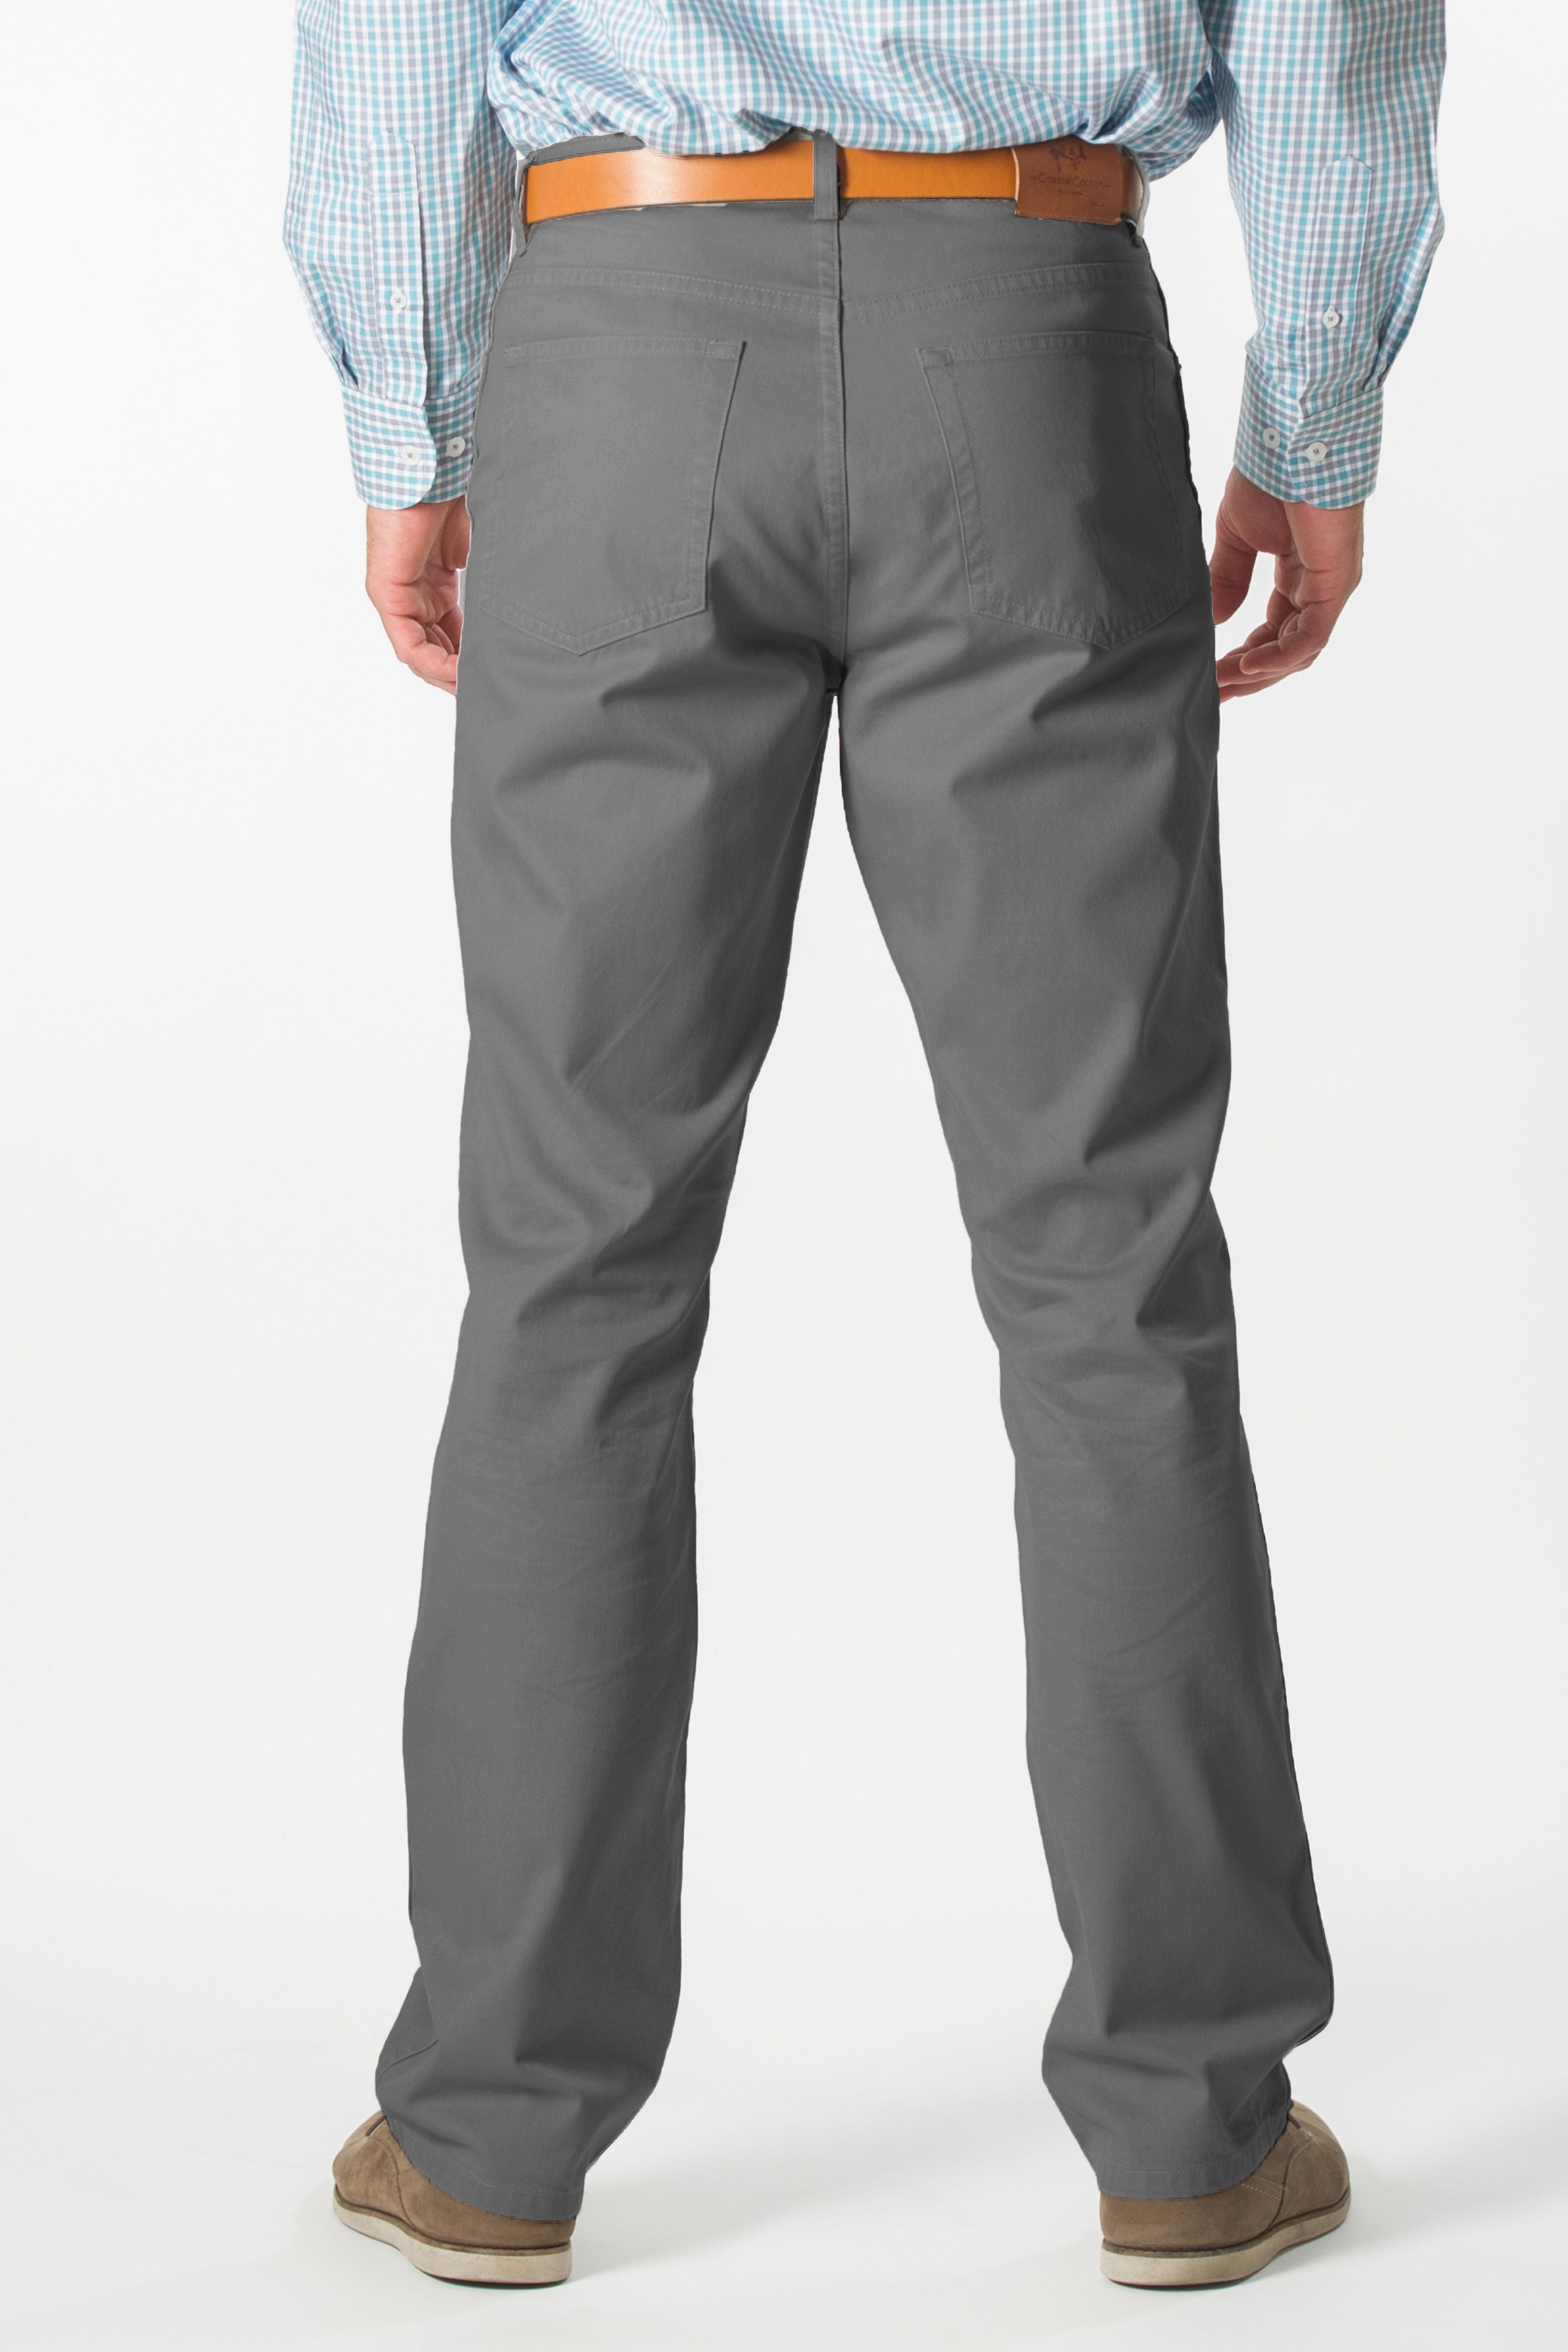 Outdoor 5 Pocket Stretch Twill Pants